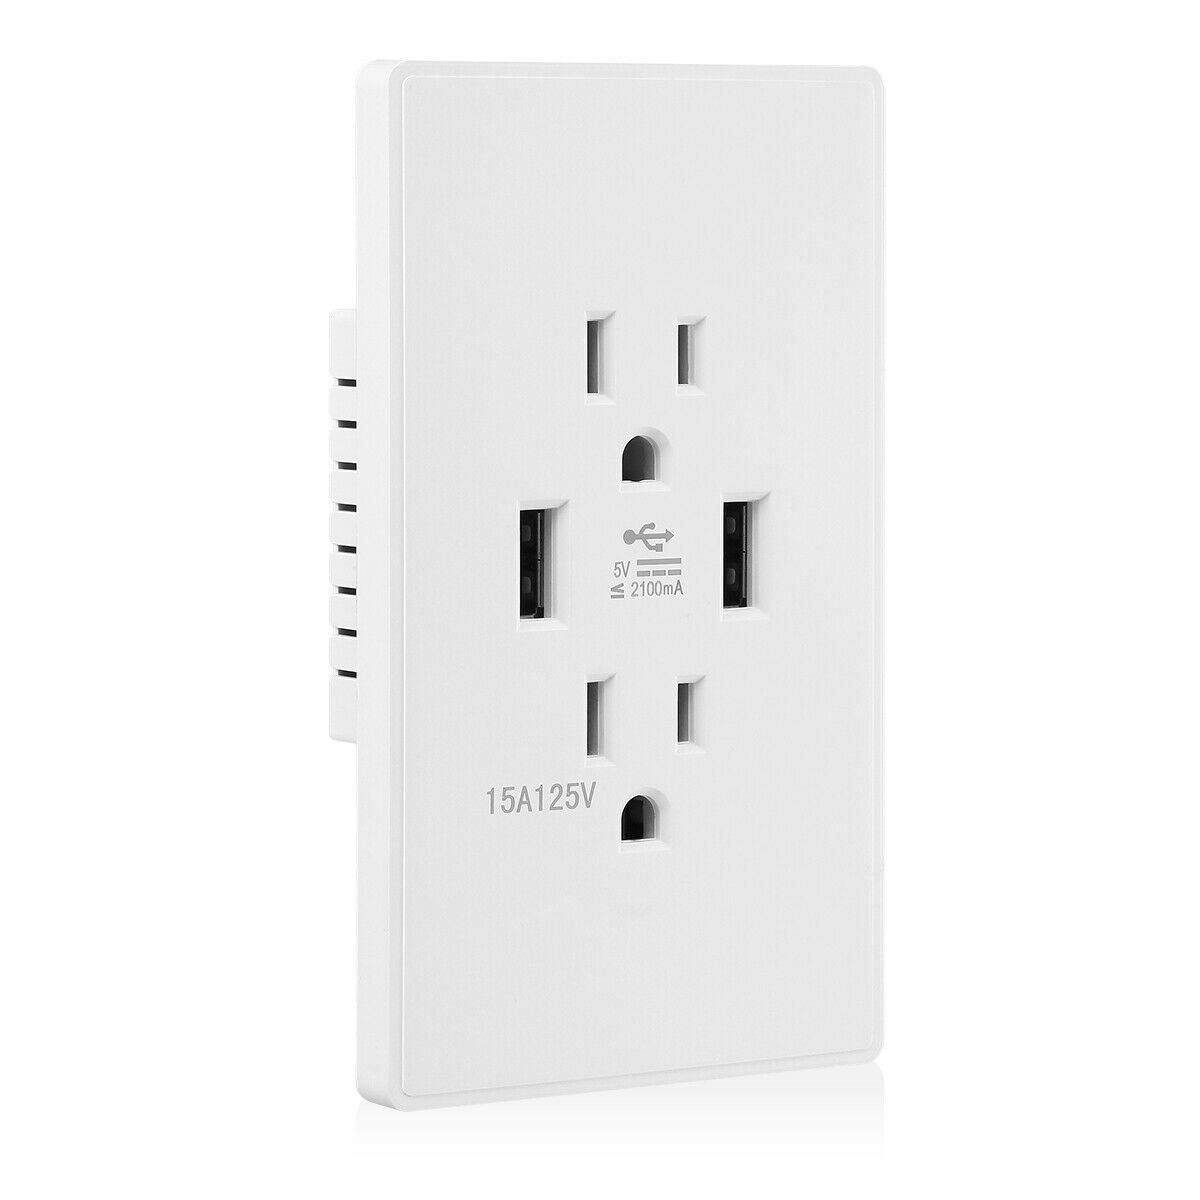 Dual USB Wall Outlet Charger Port Socket with 15A Electrical Receptacle AC Power